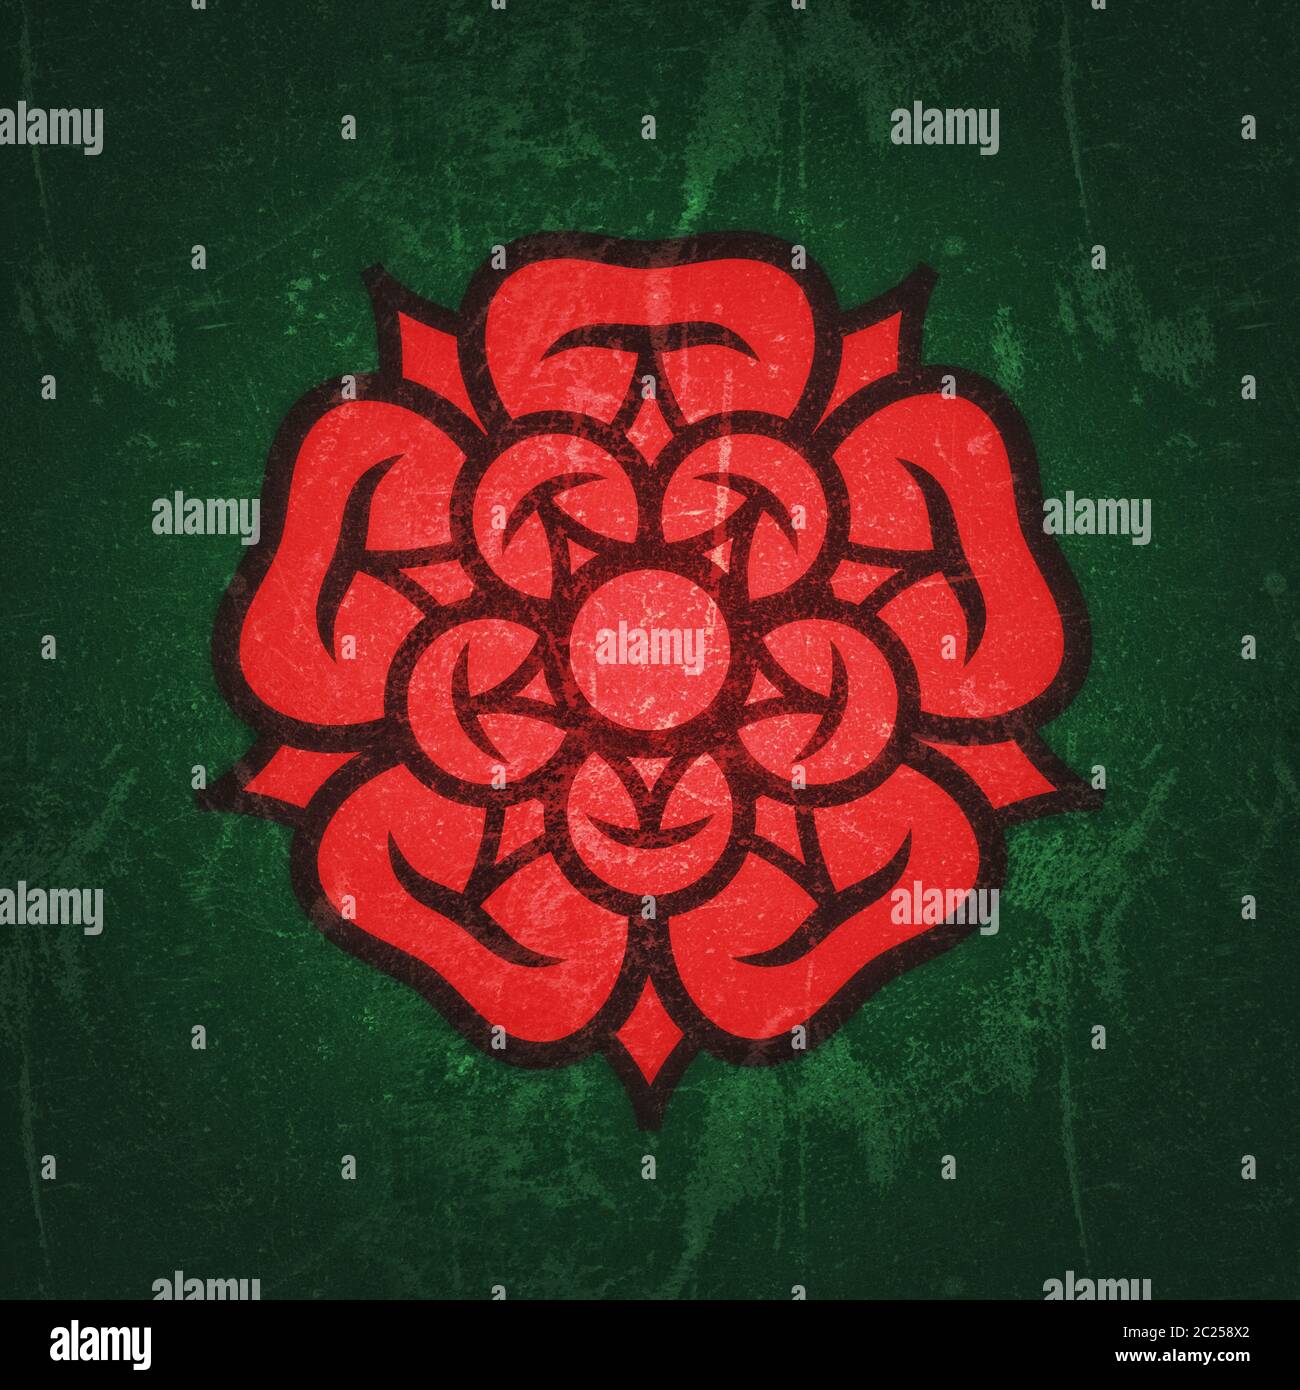 Rose (Queen of flowers), emblem of love, beauty and perfection. Stock Photo